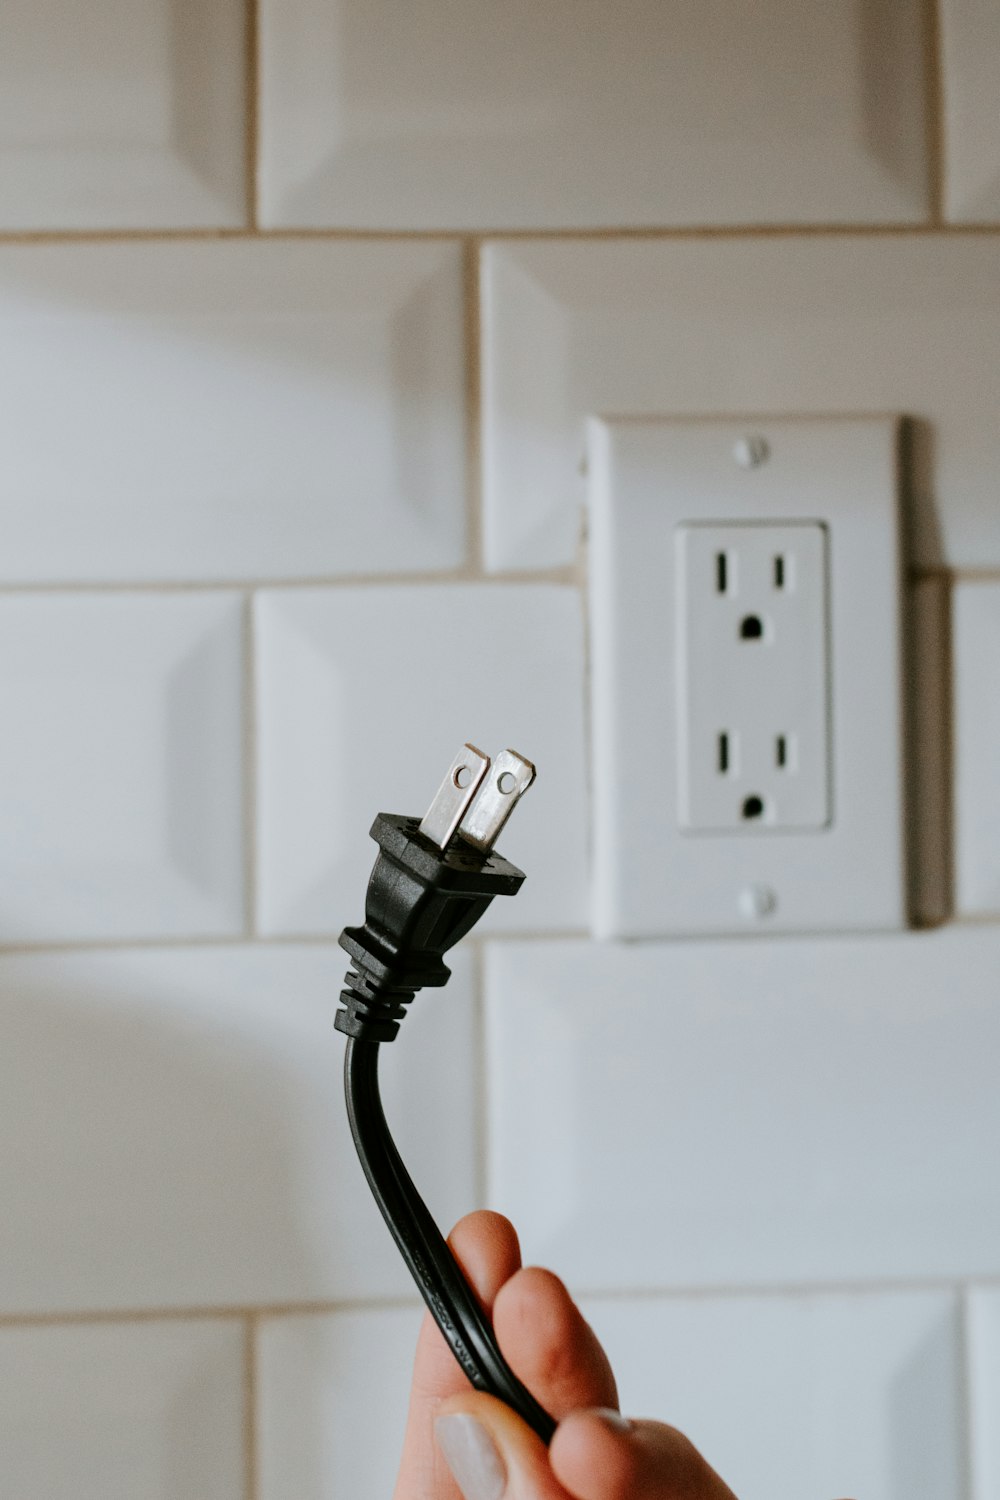 10 Steps To A More Eco-Friendly Lifestyle | Unplugging standby appliances | Photo by Kelly Sikkema from Unsplash